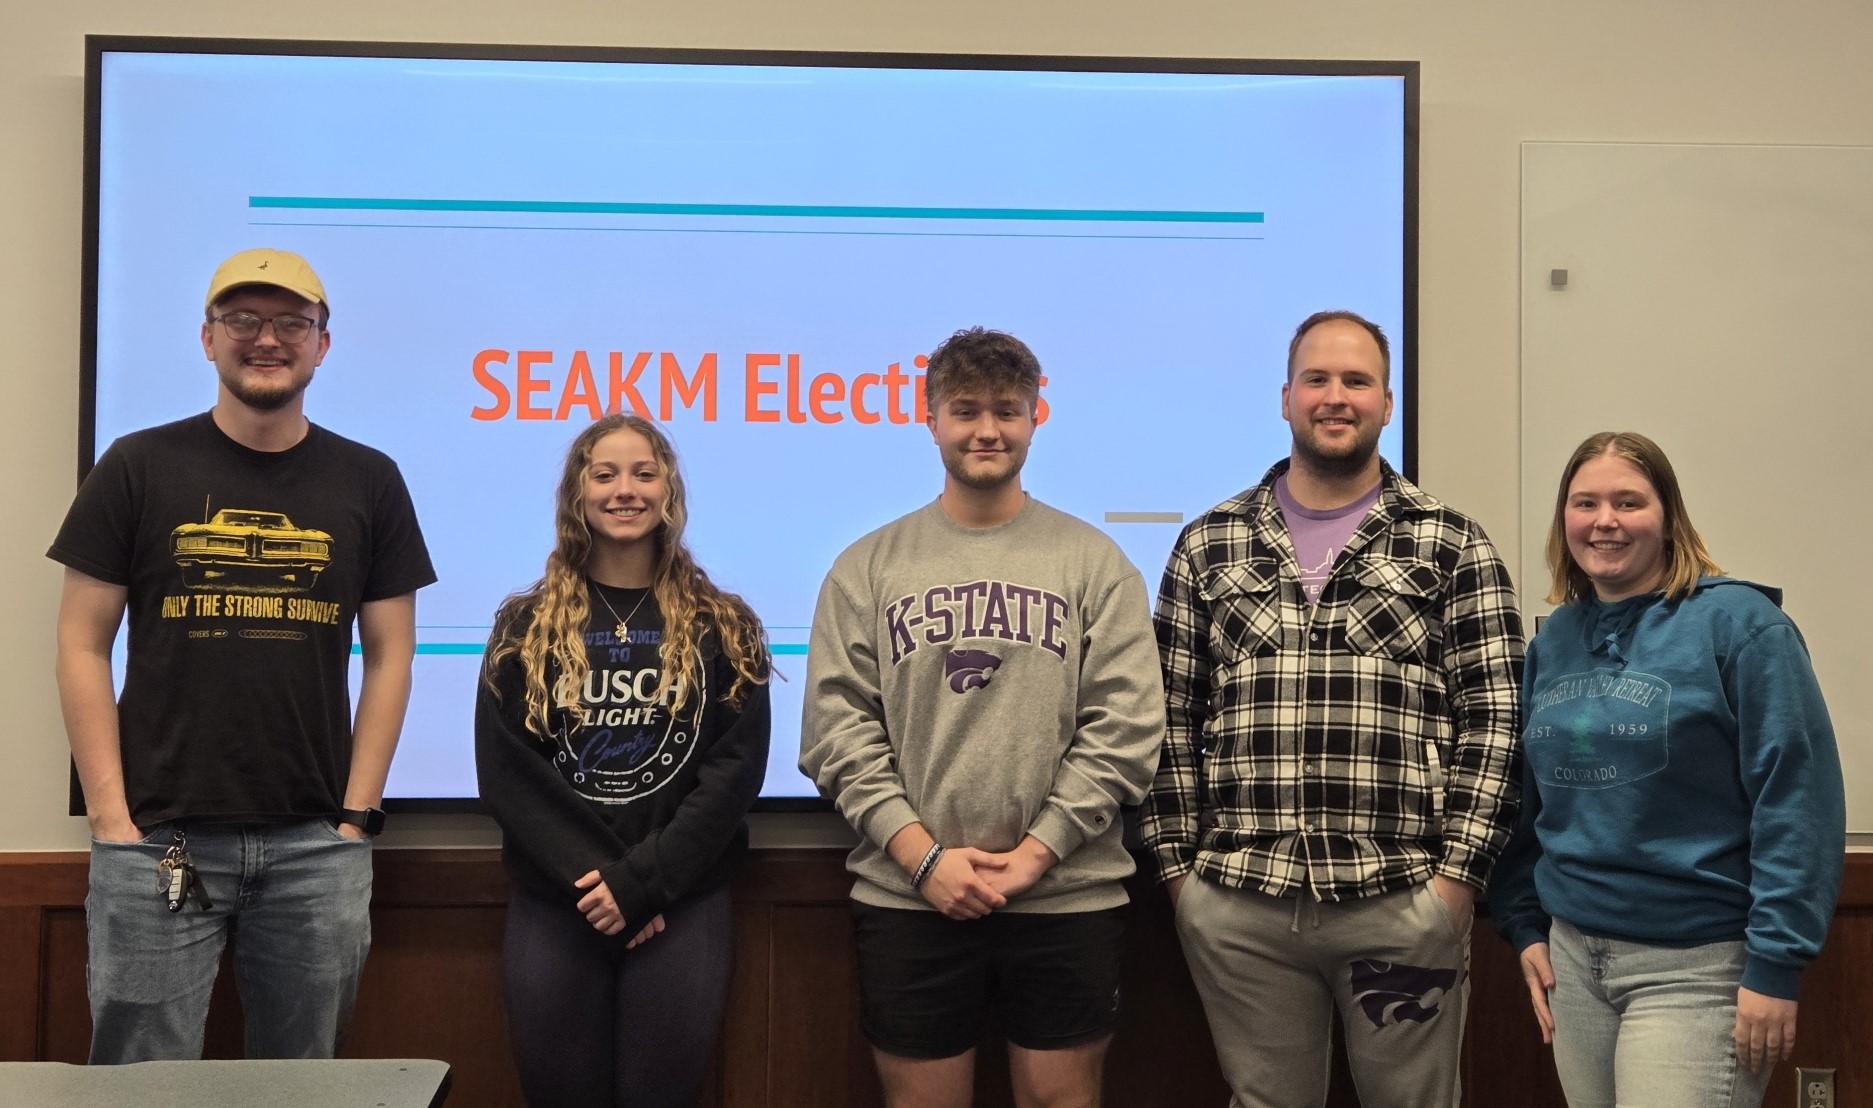 New SEAKM officers